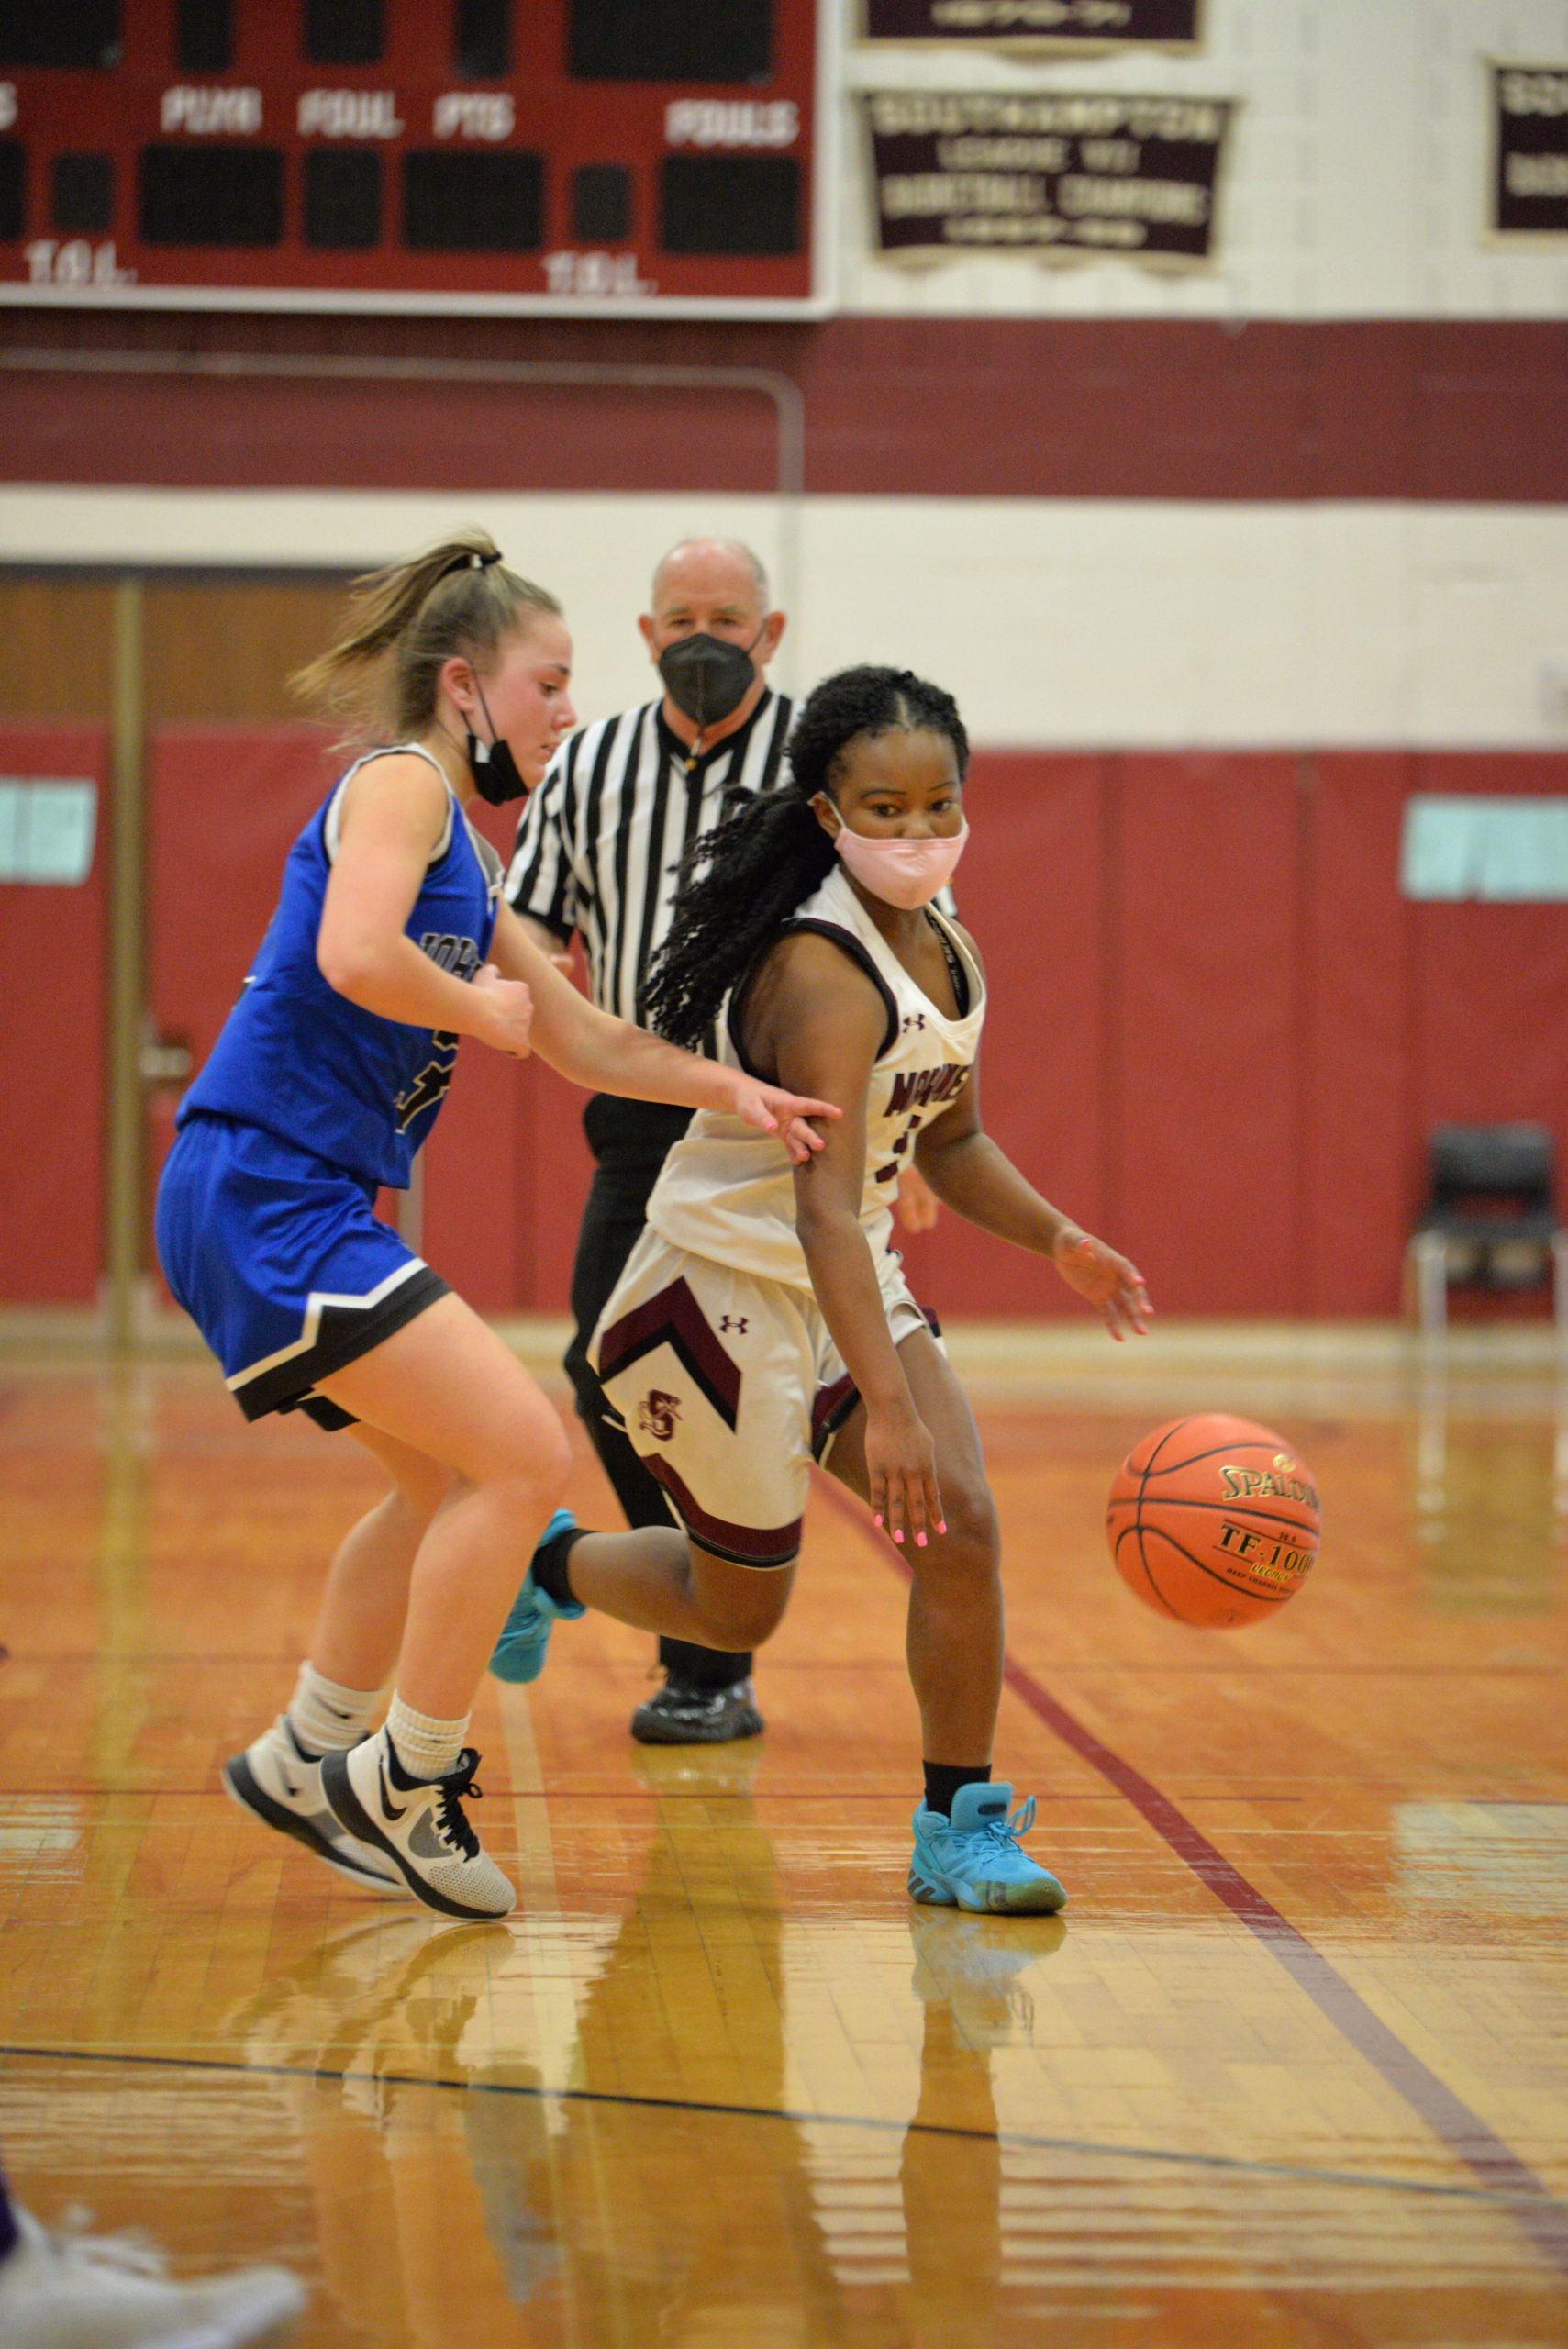 Southampton's Madison Taylor drives passed an Elwood/John Glenn player during a home game on February 21.